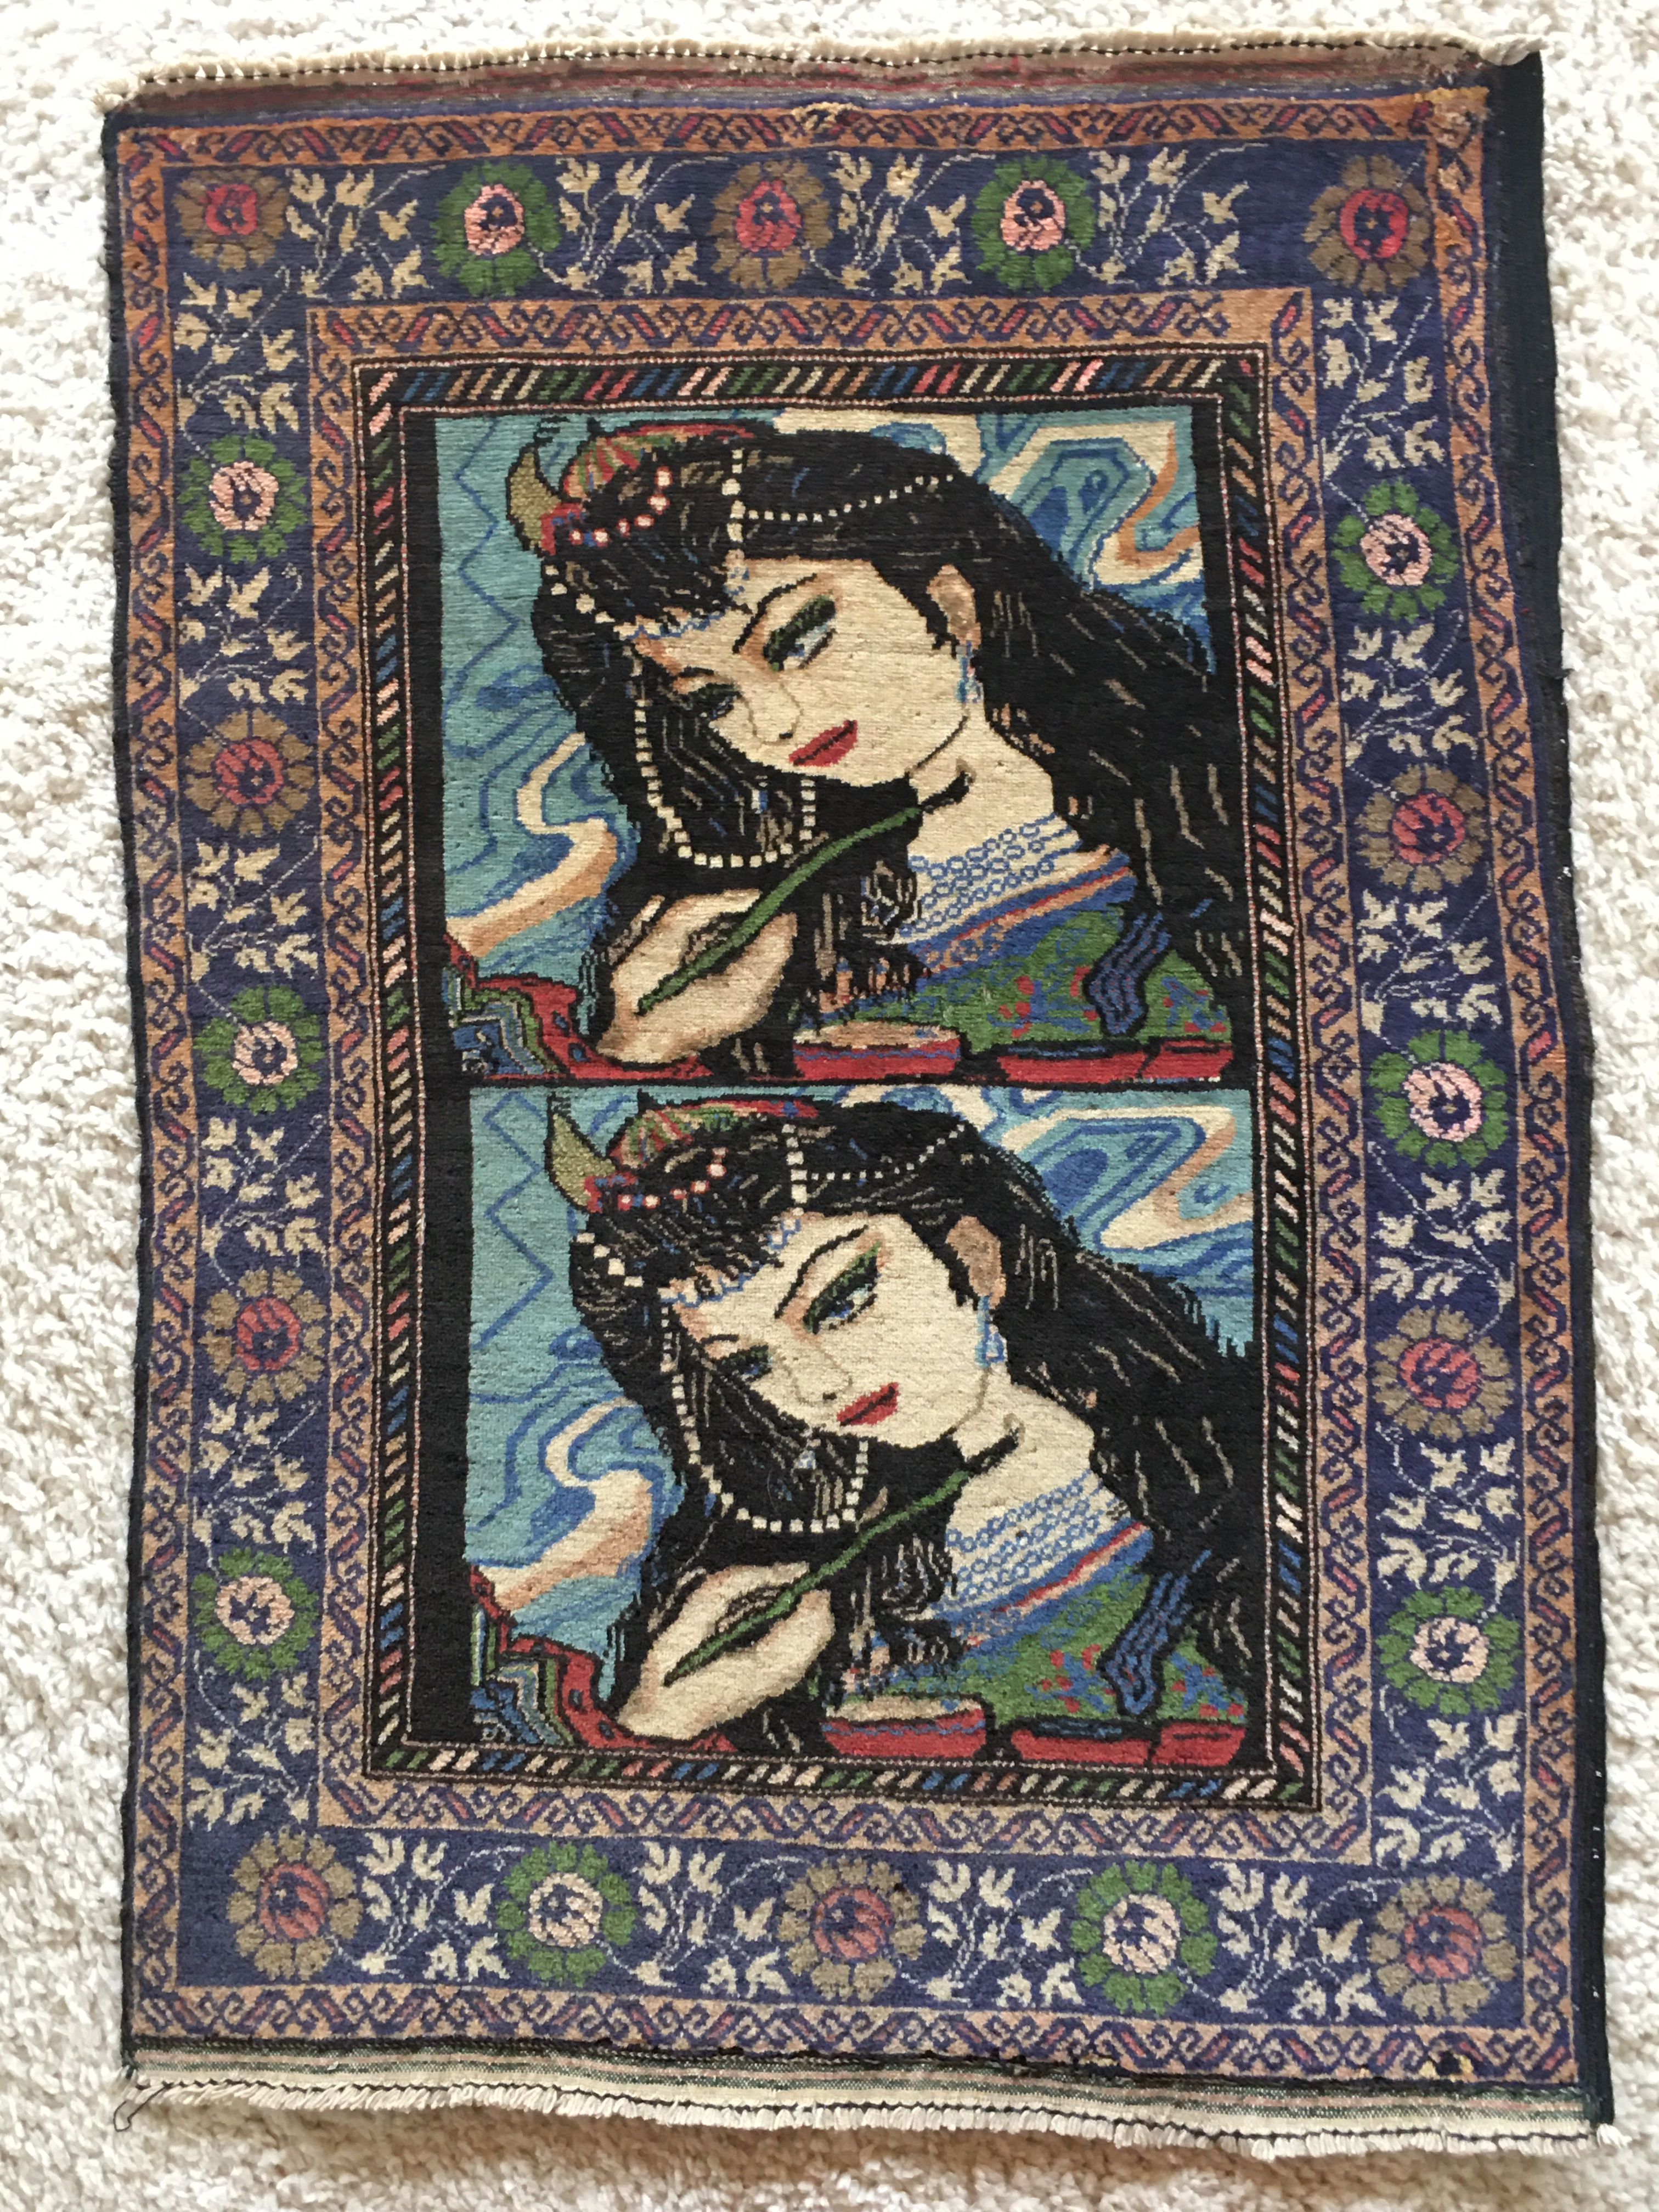 A rug featuring a portrait of a woman being painted by a disembodied hand